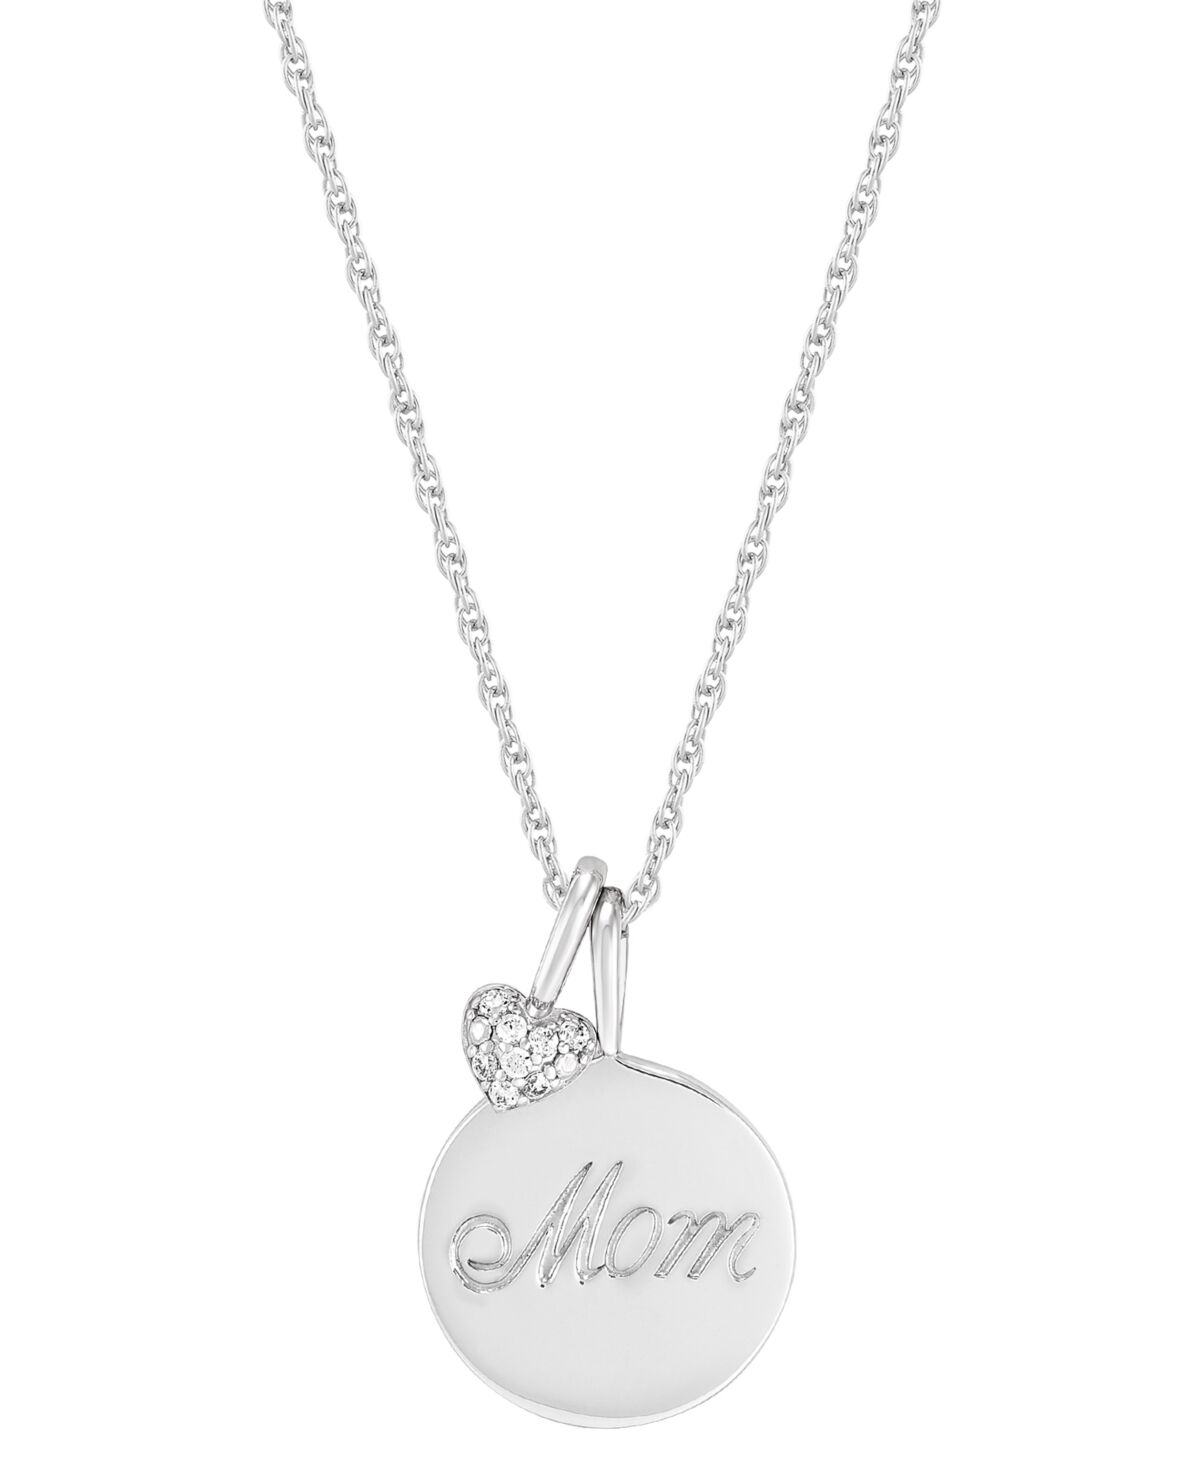 Macy's Diamond Heart & Mom Coin Pendant Necklace (1/10 ct. t.w.) in Sterling Silver, 16